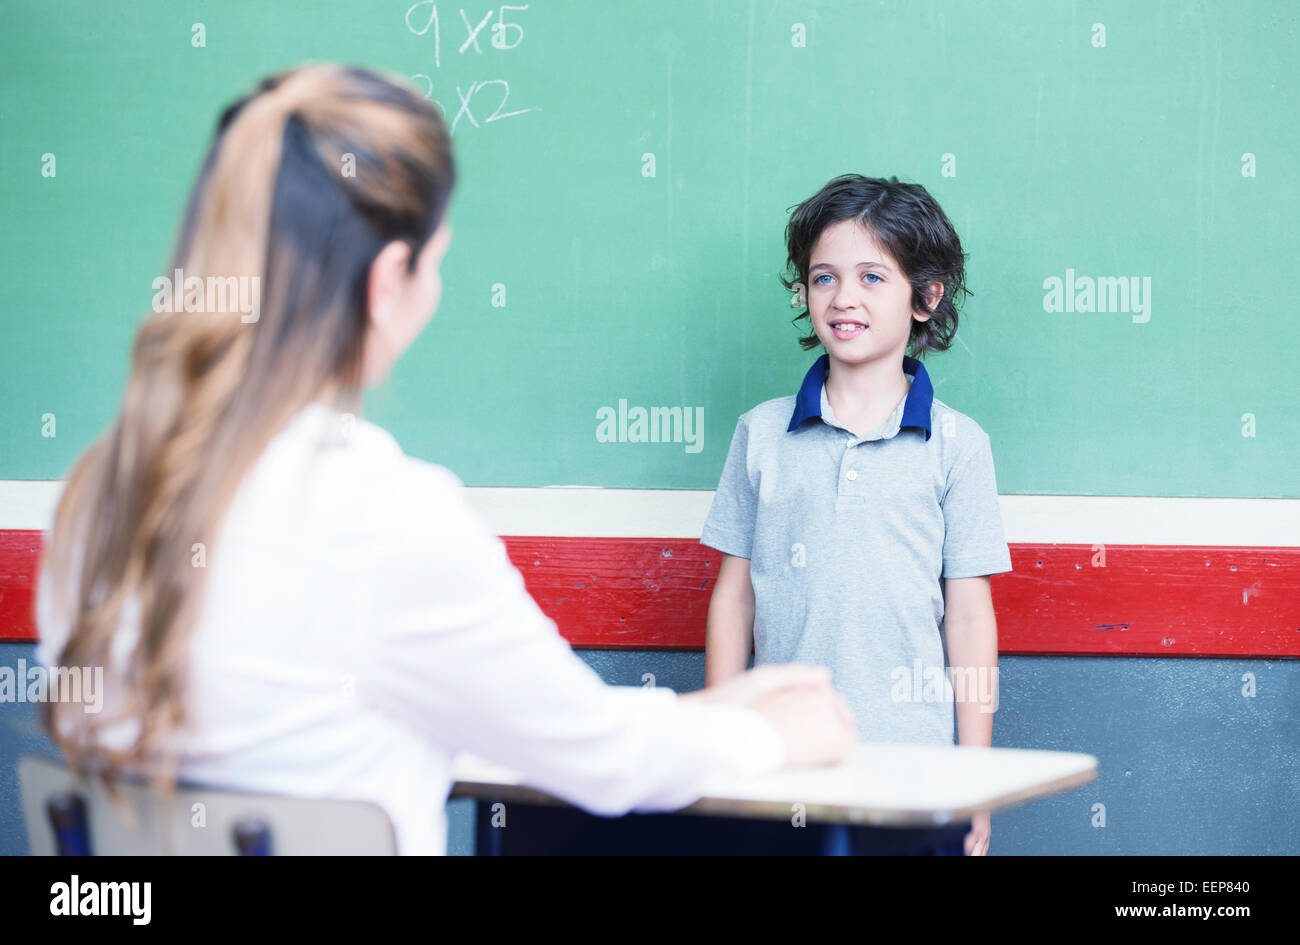 Kid questioned at school in front of chalkboard. Stock Photo